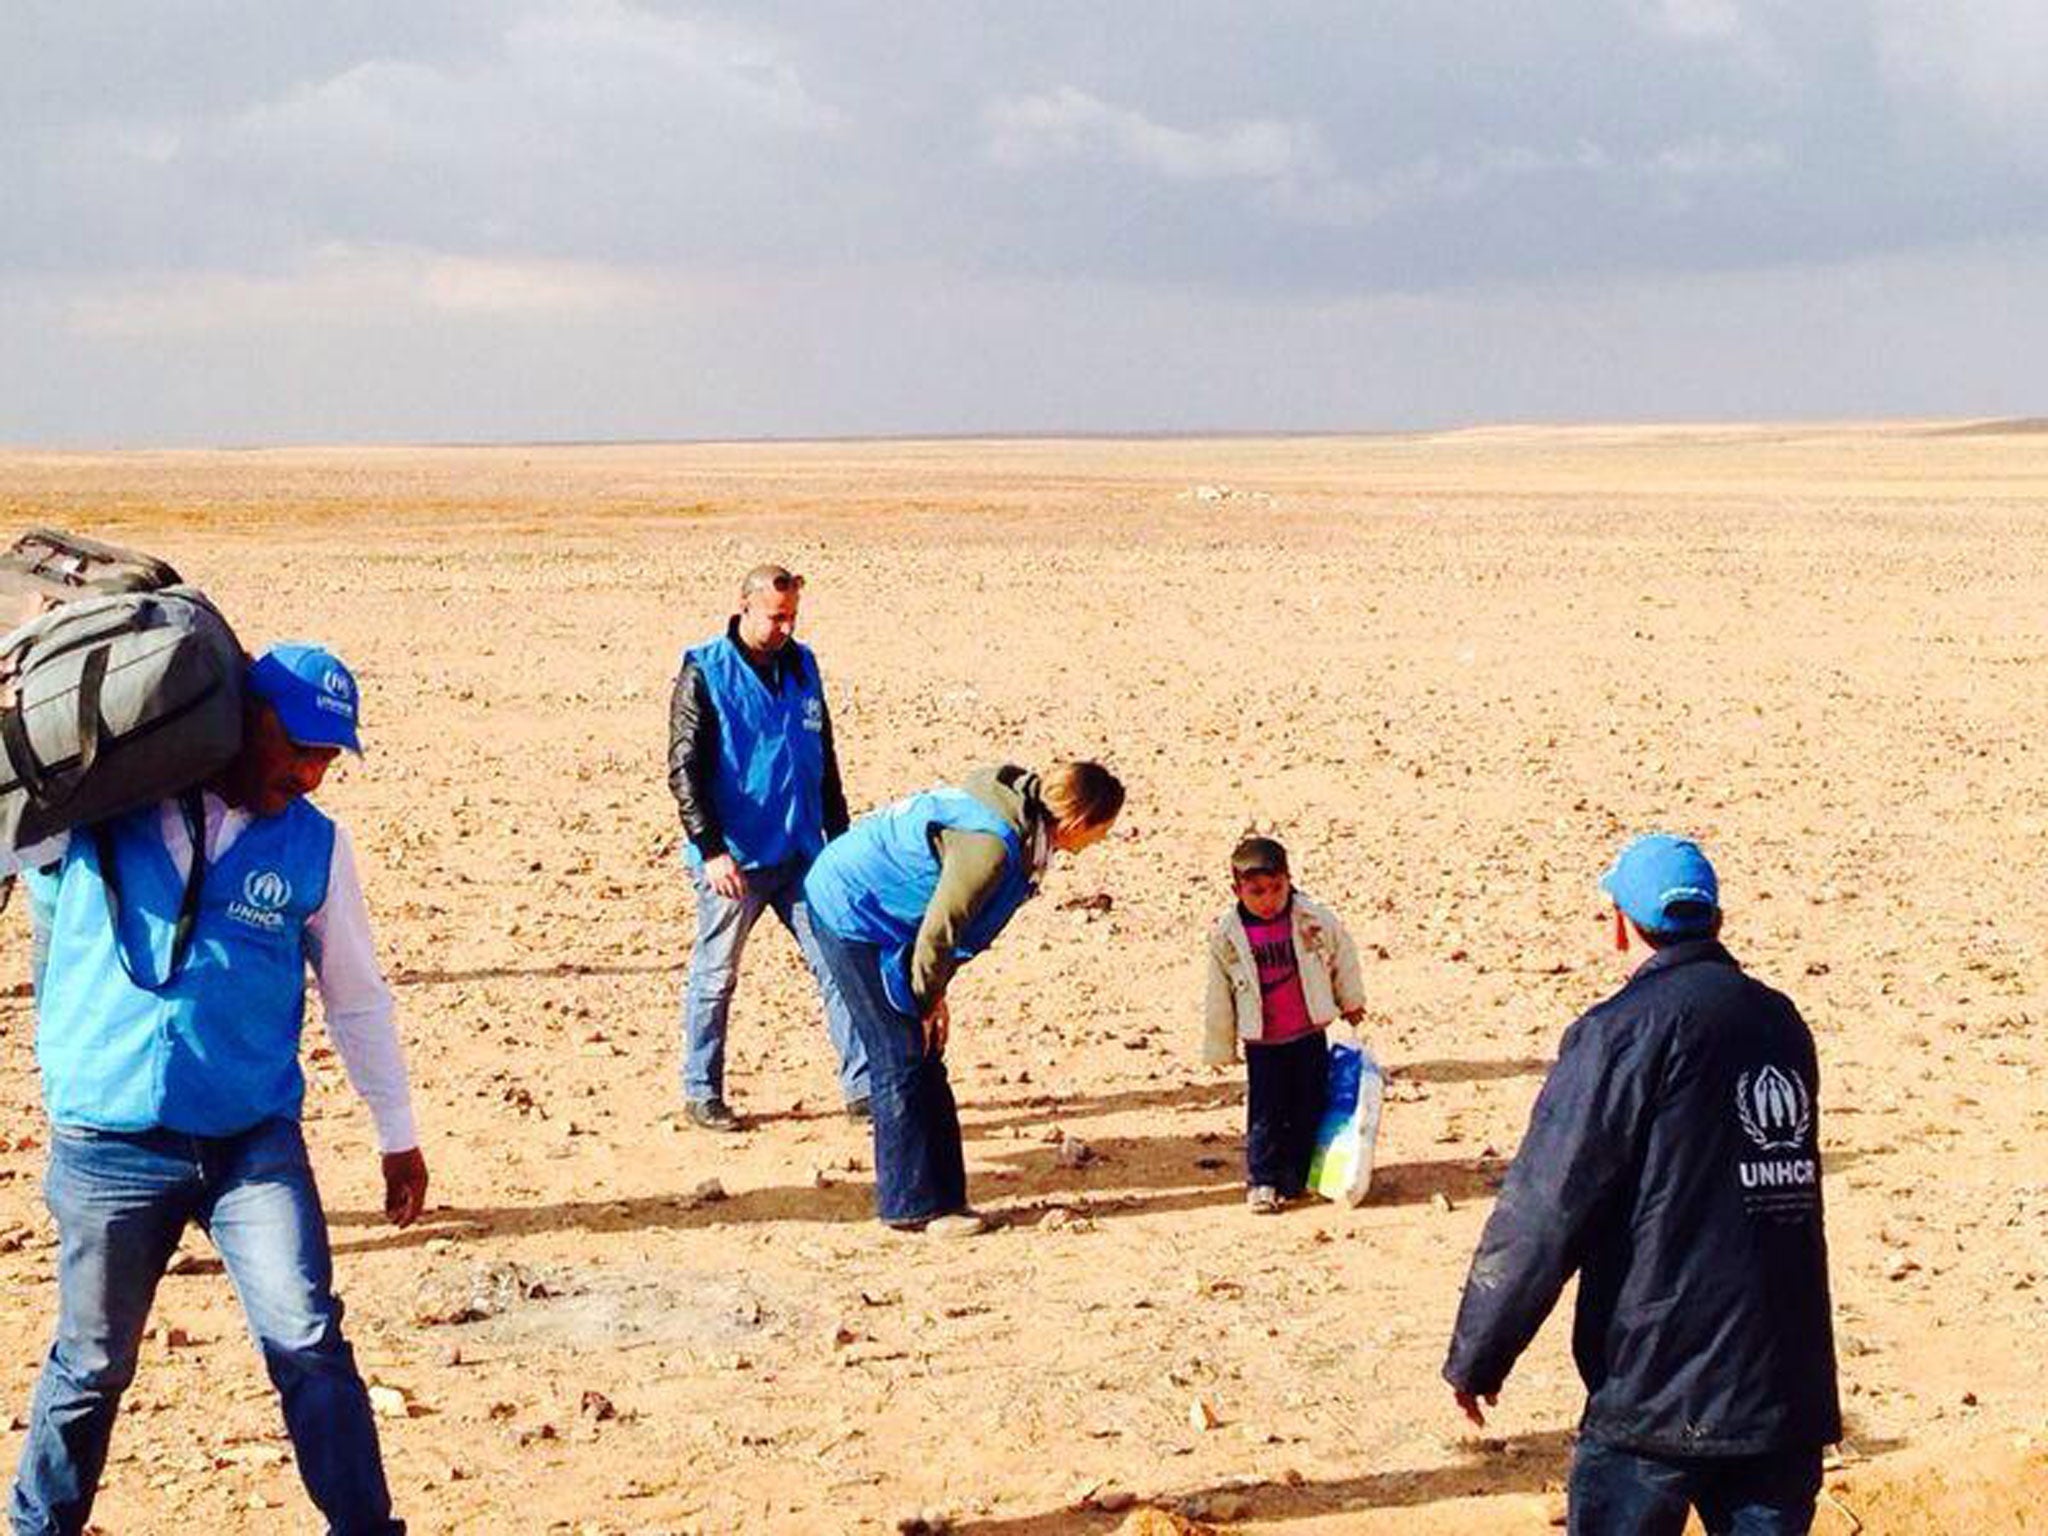 This extraordinary image showing four-year-old Syrian refugee Marwan being assisted by UNHCR officials was seized upon and shared around the world via social media